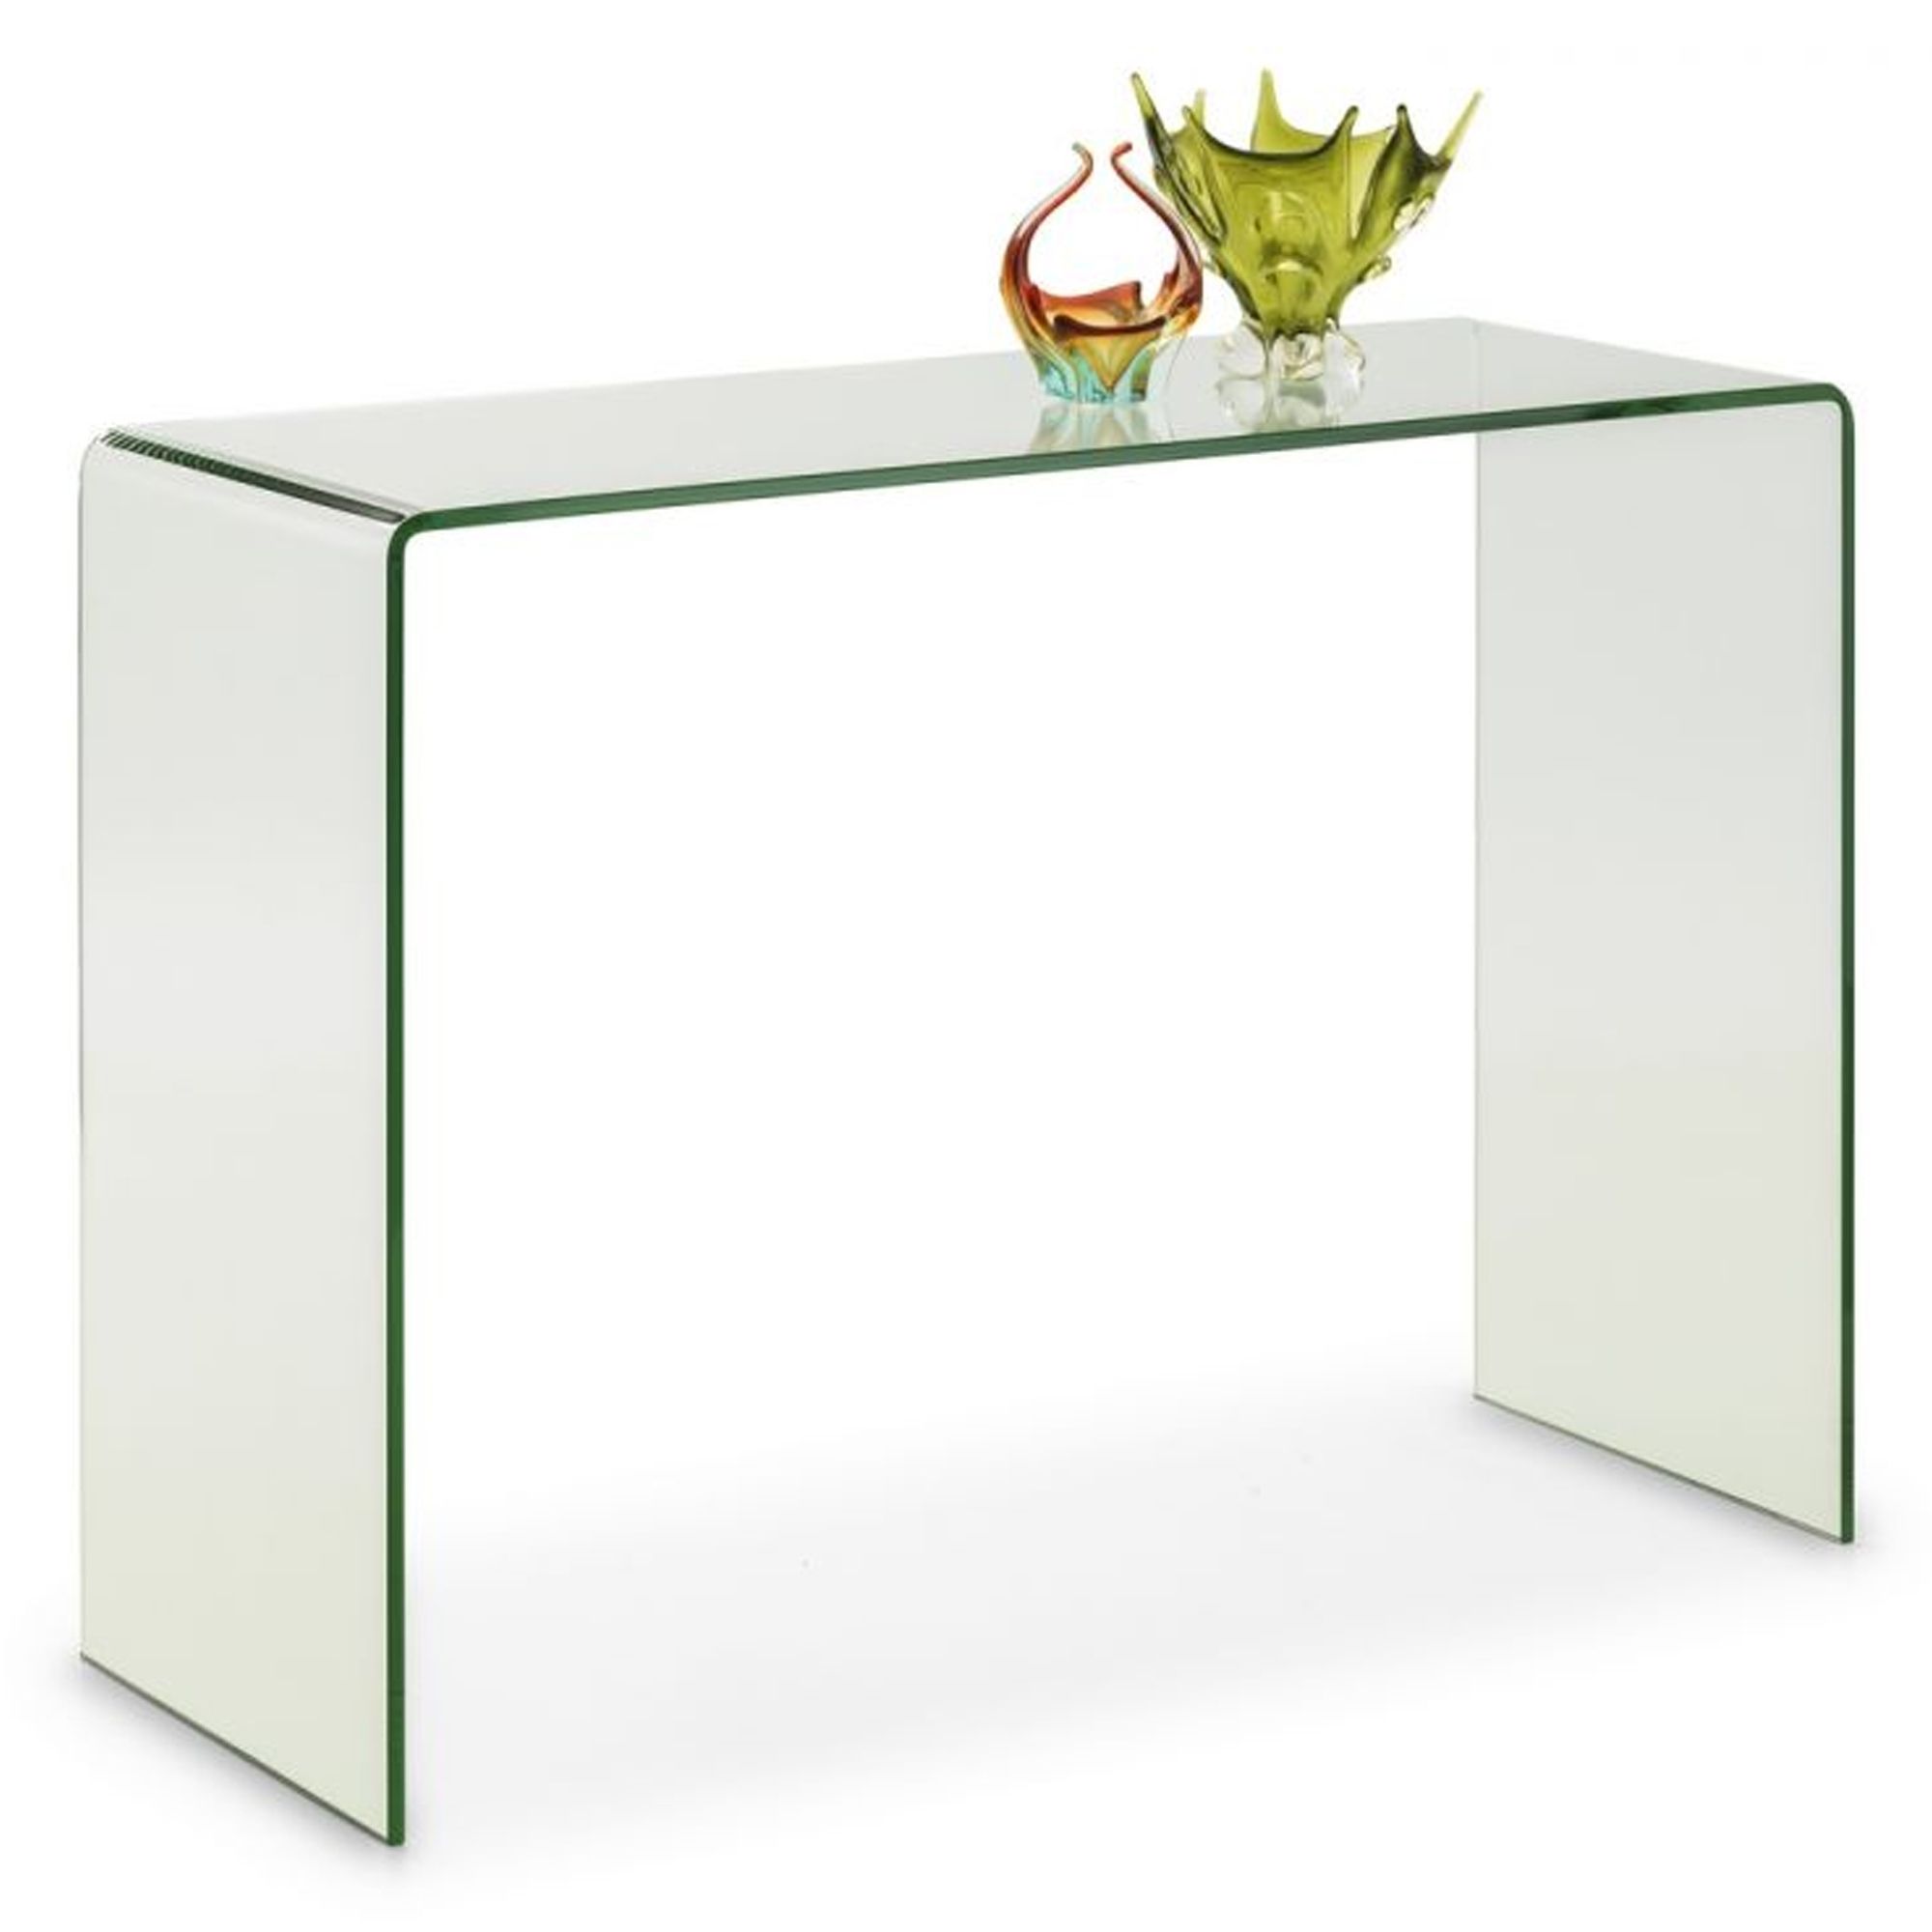 Amalfi Bent Glass Console Table | Modern & Contemporary Console Tables Intended For Glass Console Tables (Gallery 20 of 20)